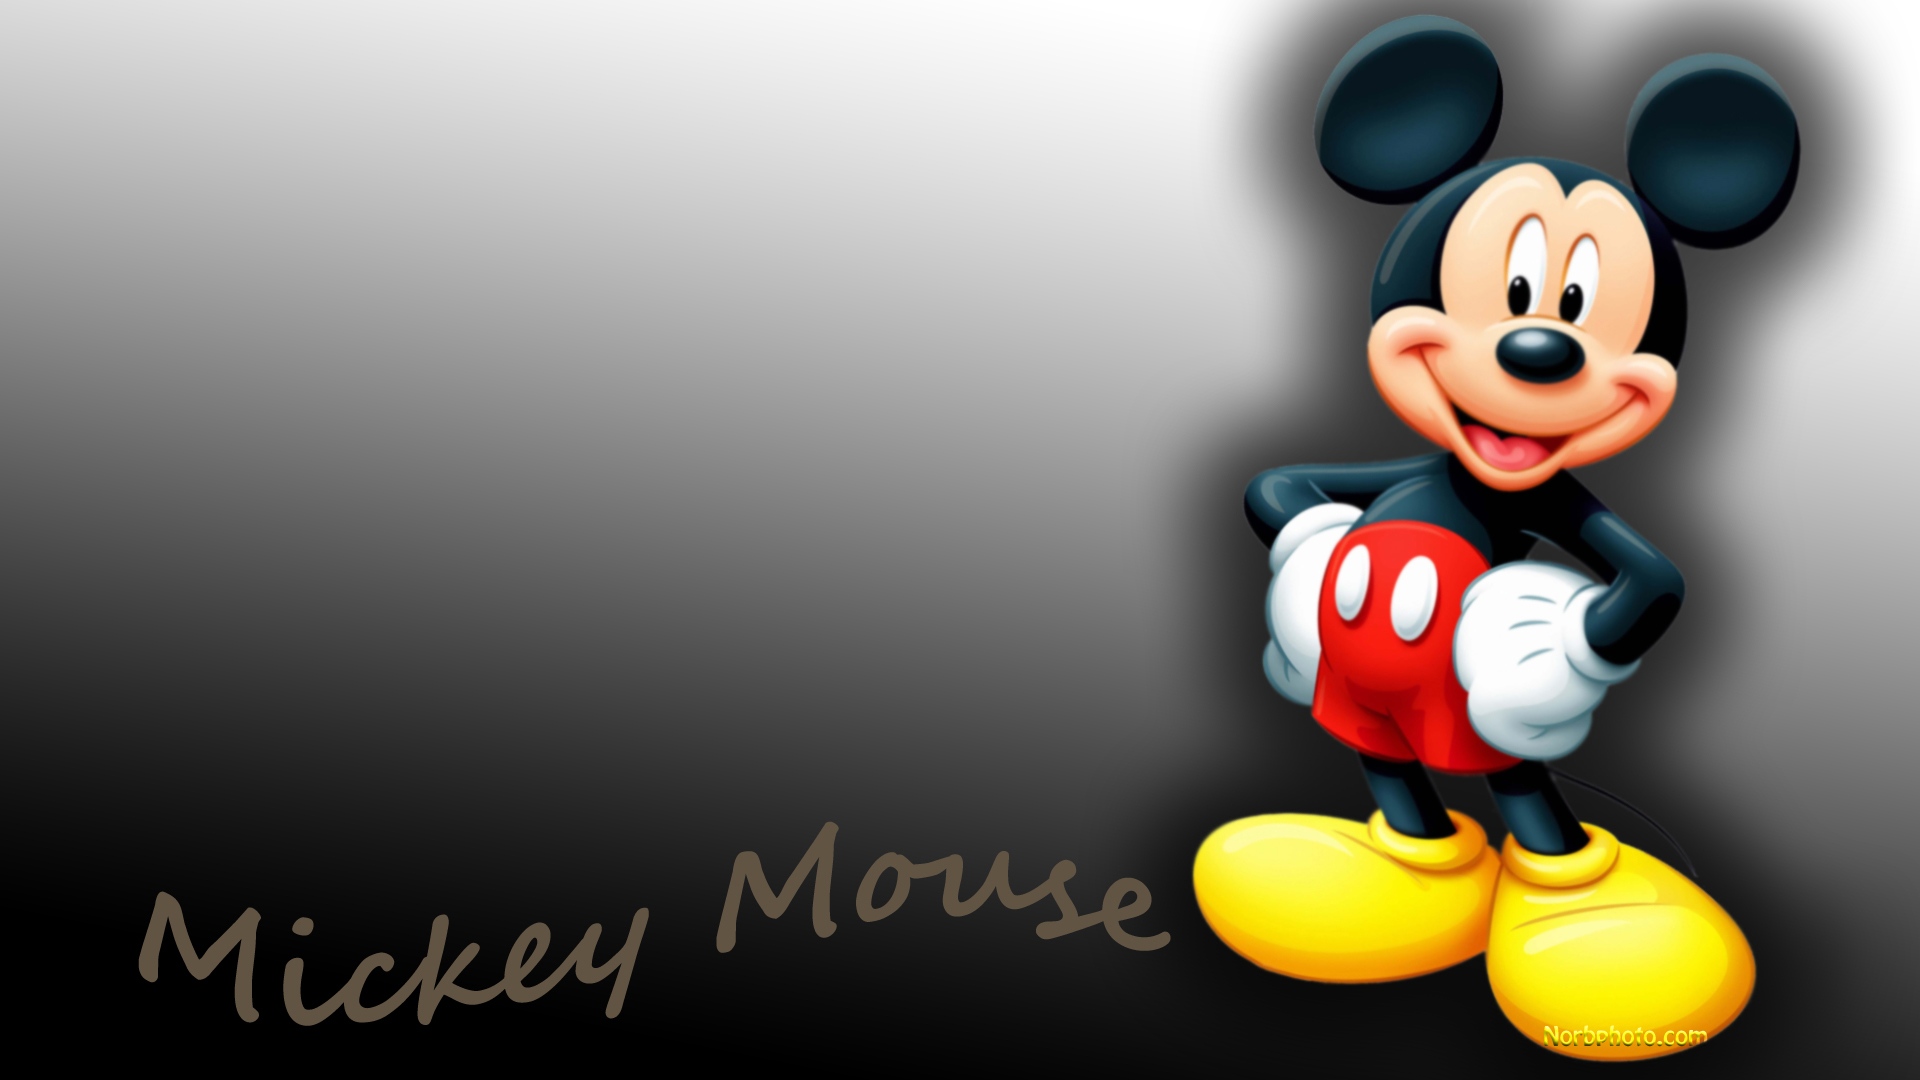 Mickey Mouse Disney Wallpaper Background